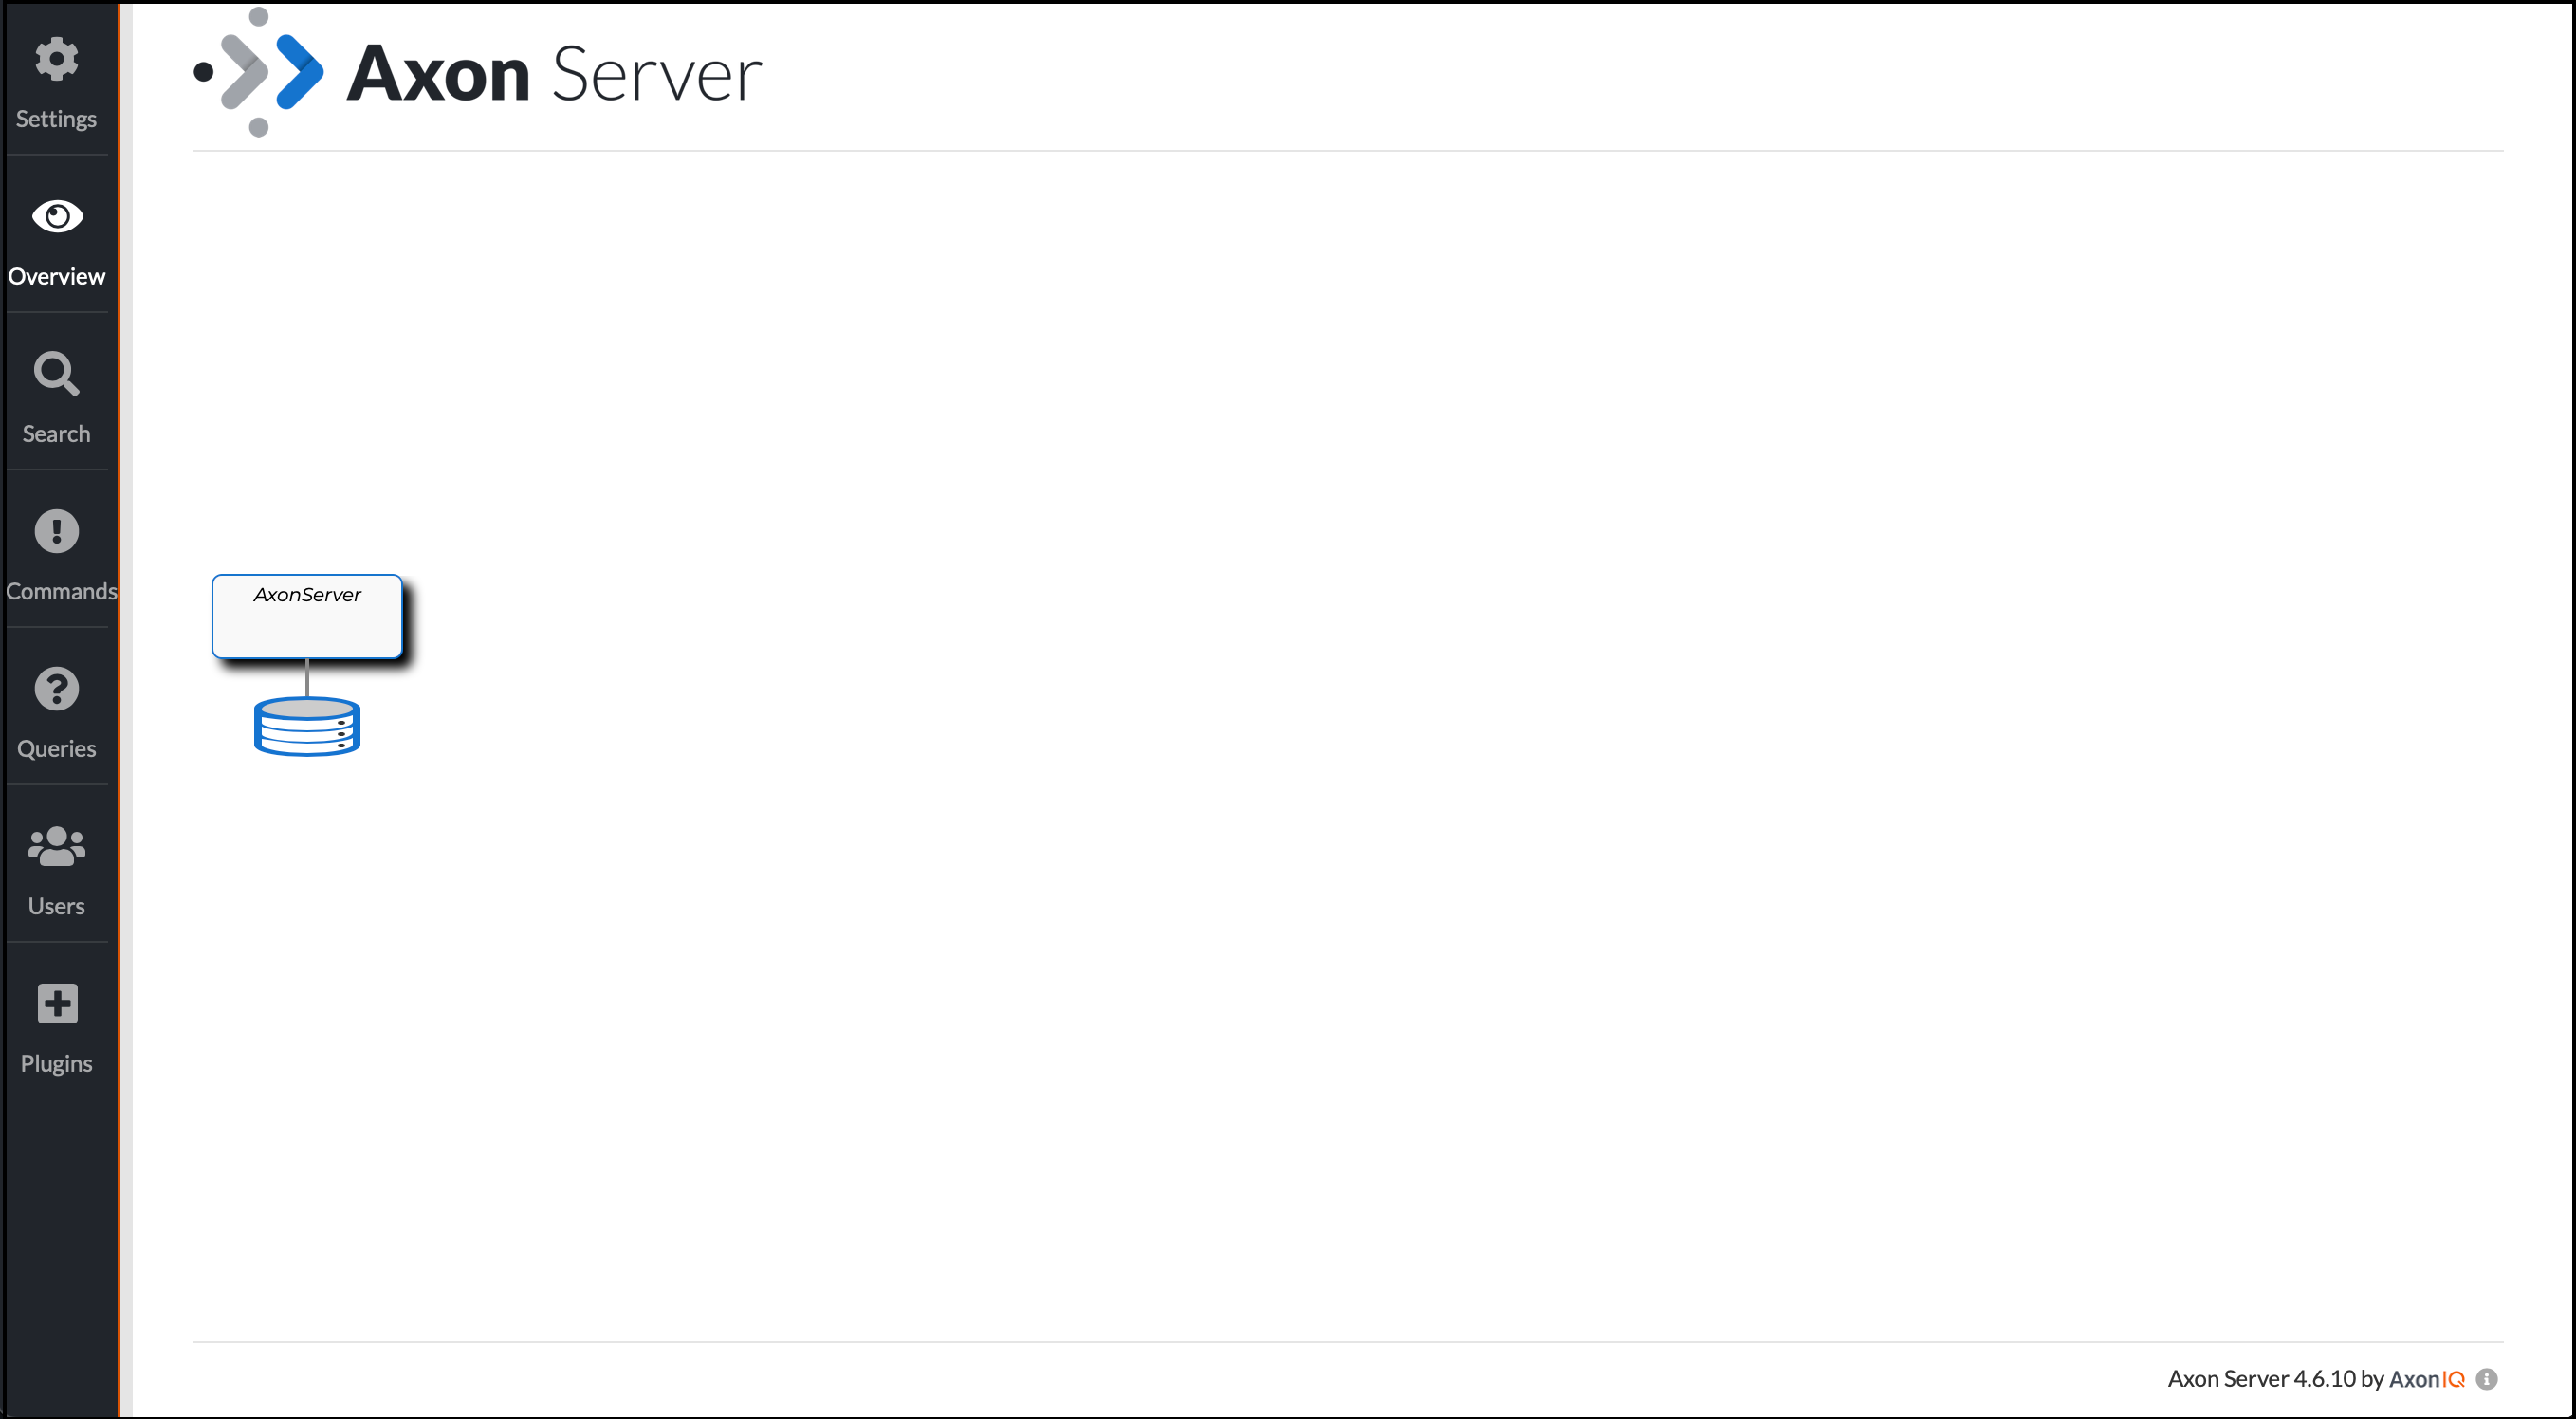 A screenshot of Axon Server’s overview page